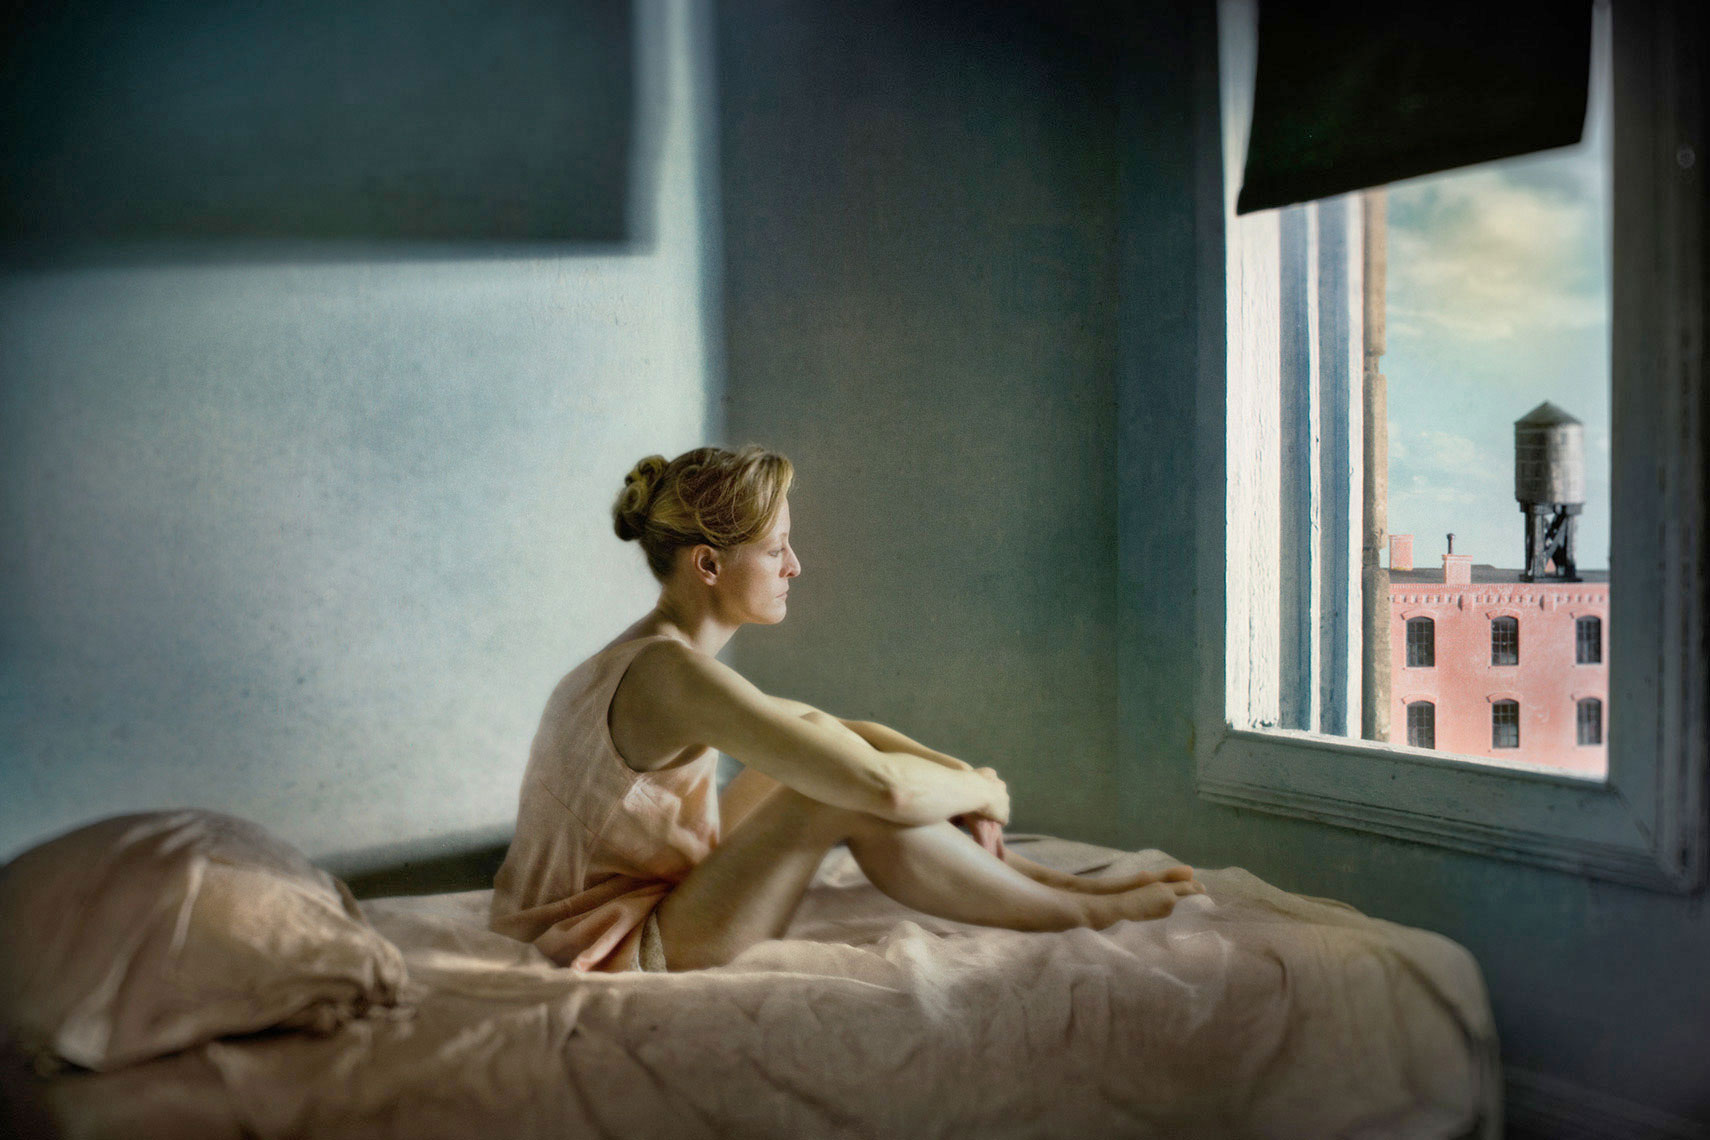 A photomontage homage to Edward Hopper’s painting, “Morning Sun”, set in a 1940s’ New York apartment bedroom, a melancholic blonde woman wearing a pale pink slip sits on the rumpled sheets of an unmade bed, gazing in contemplation out the window onto the urban landscape.